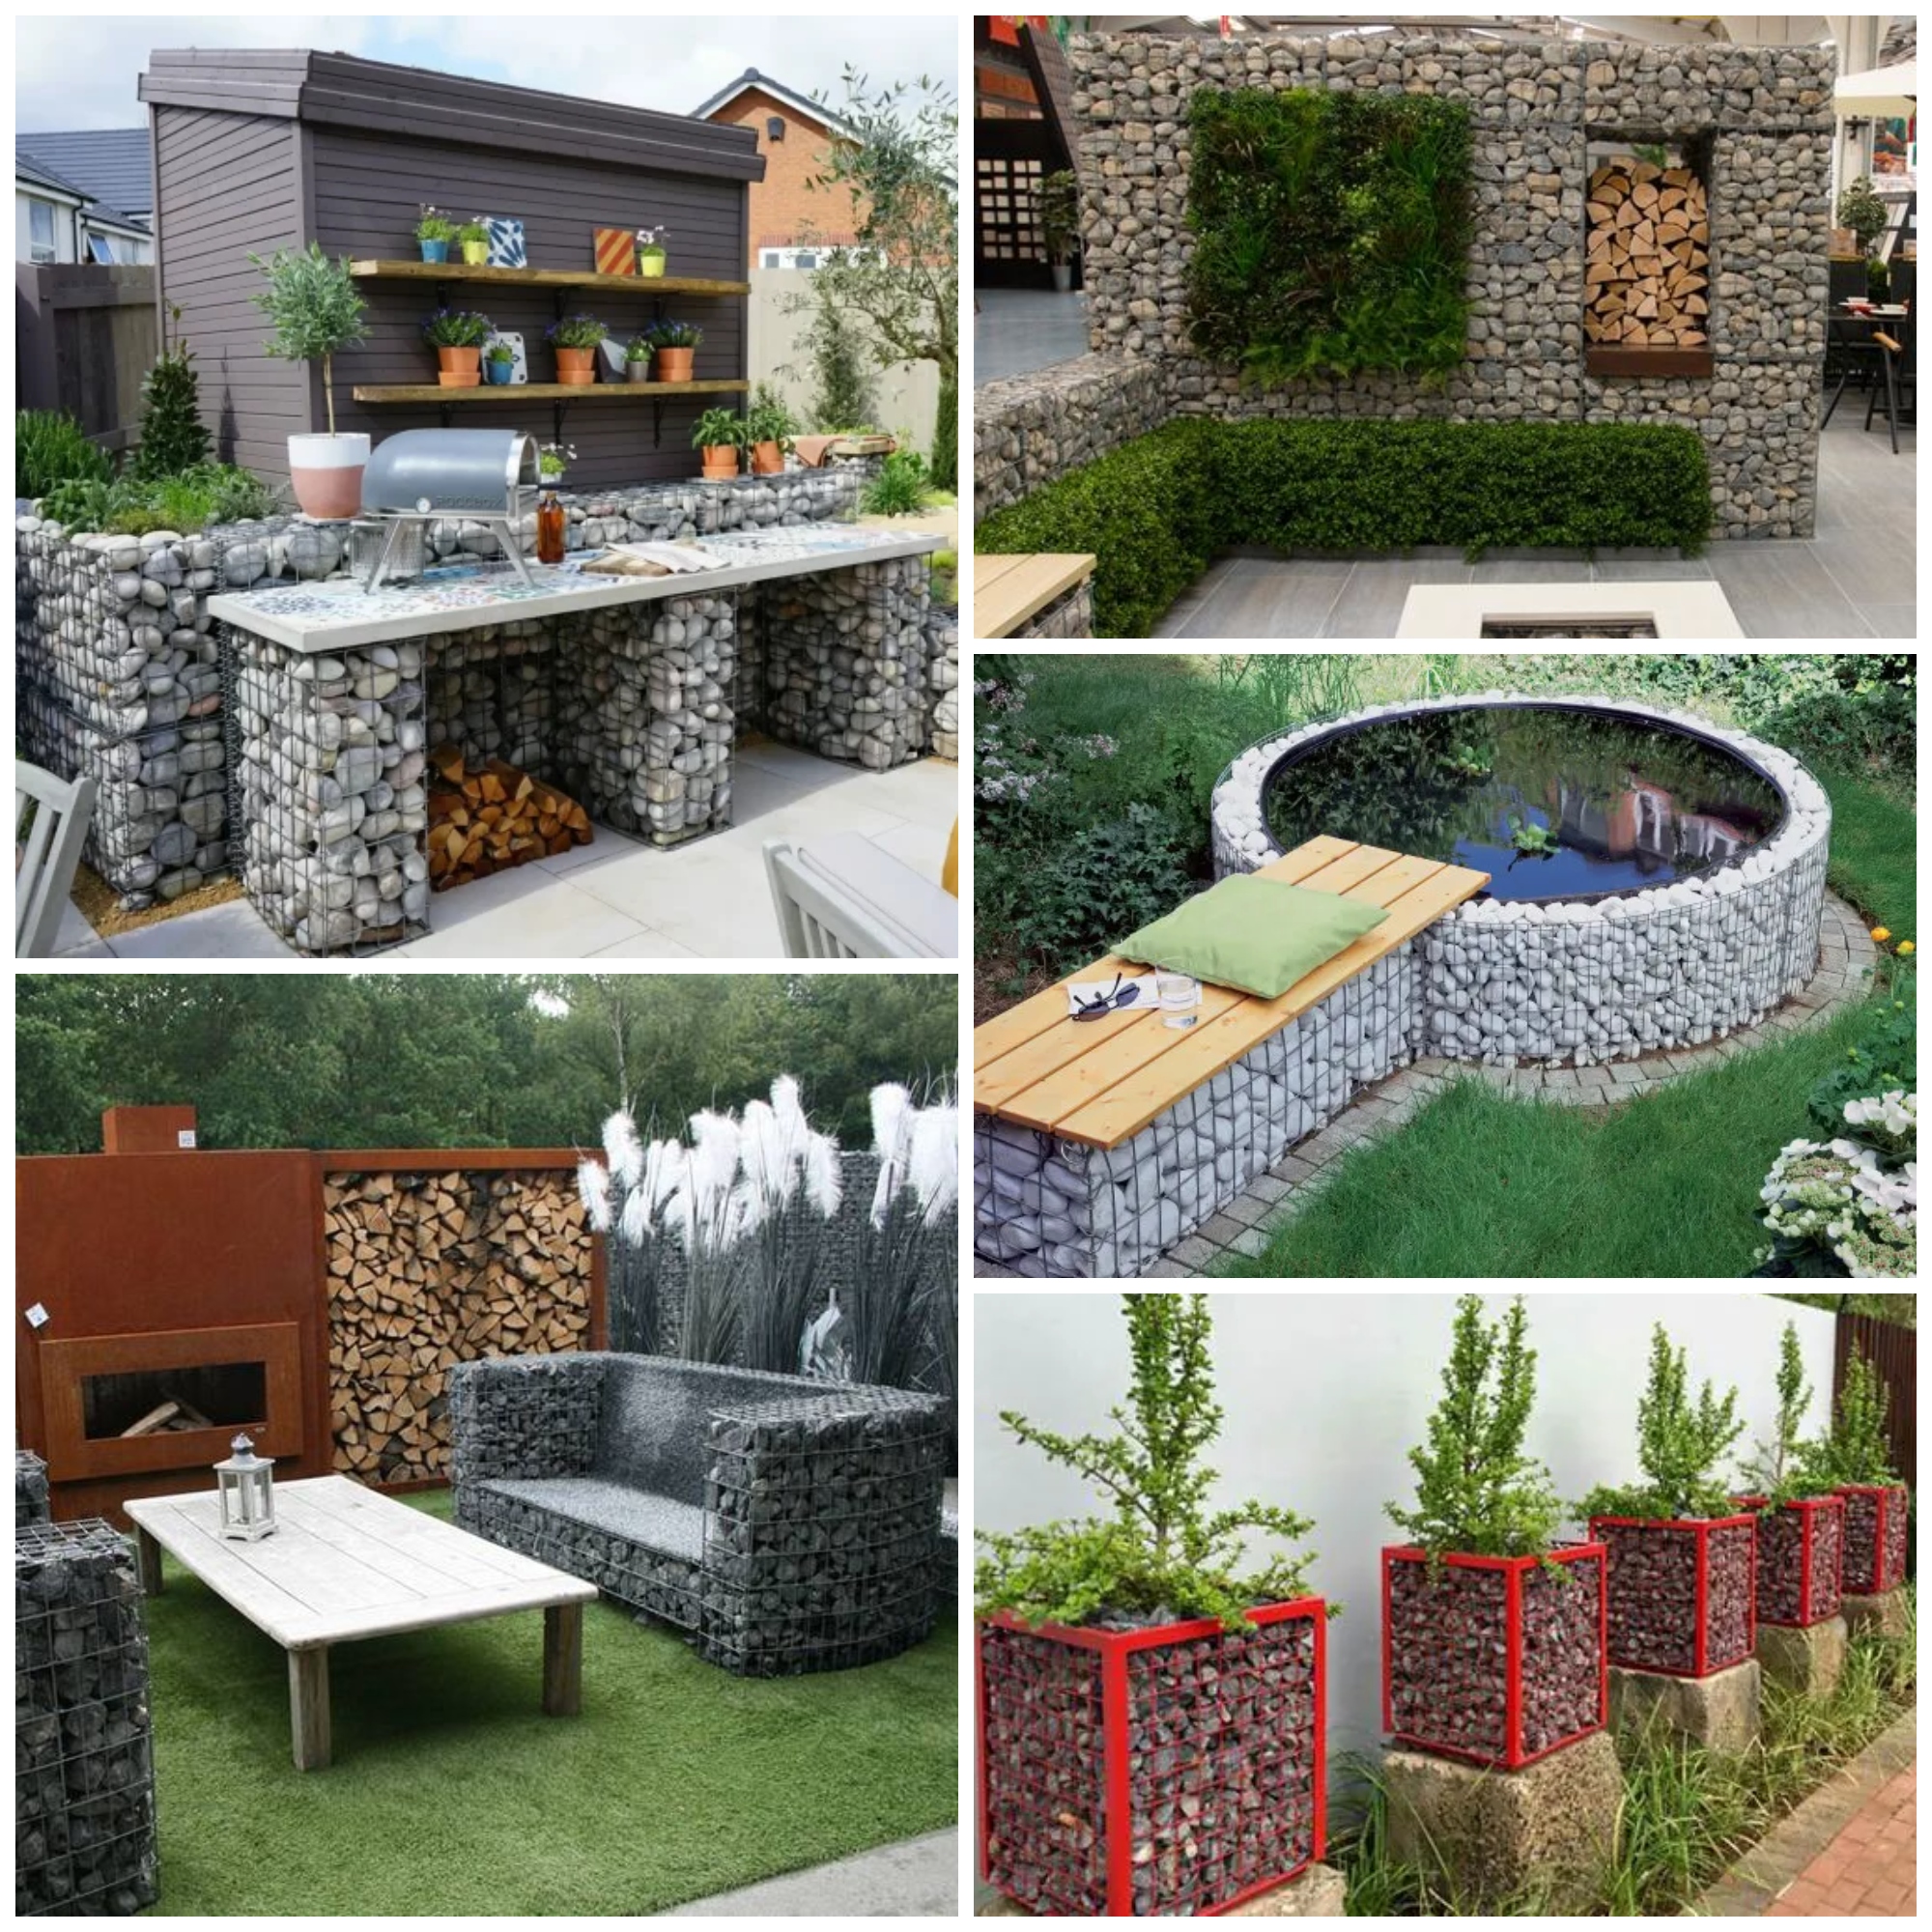 Stunning gabion ideas for outdoor landscaping